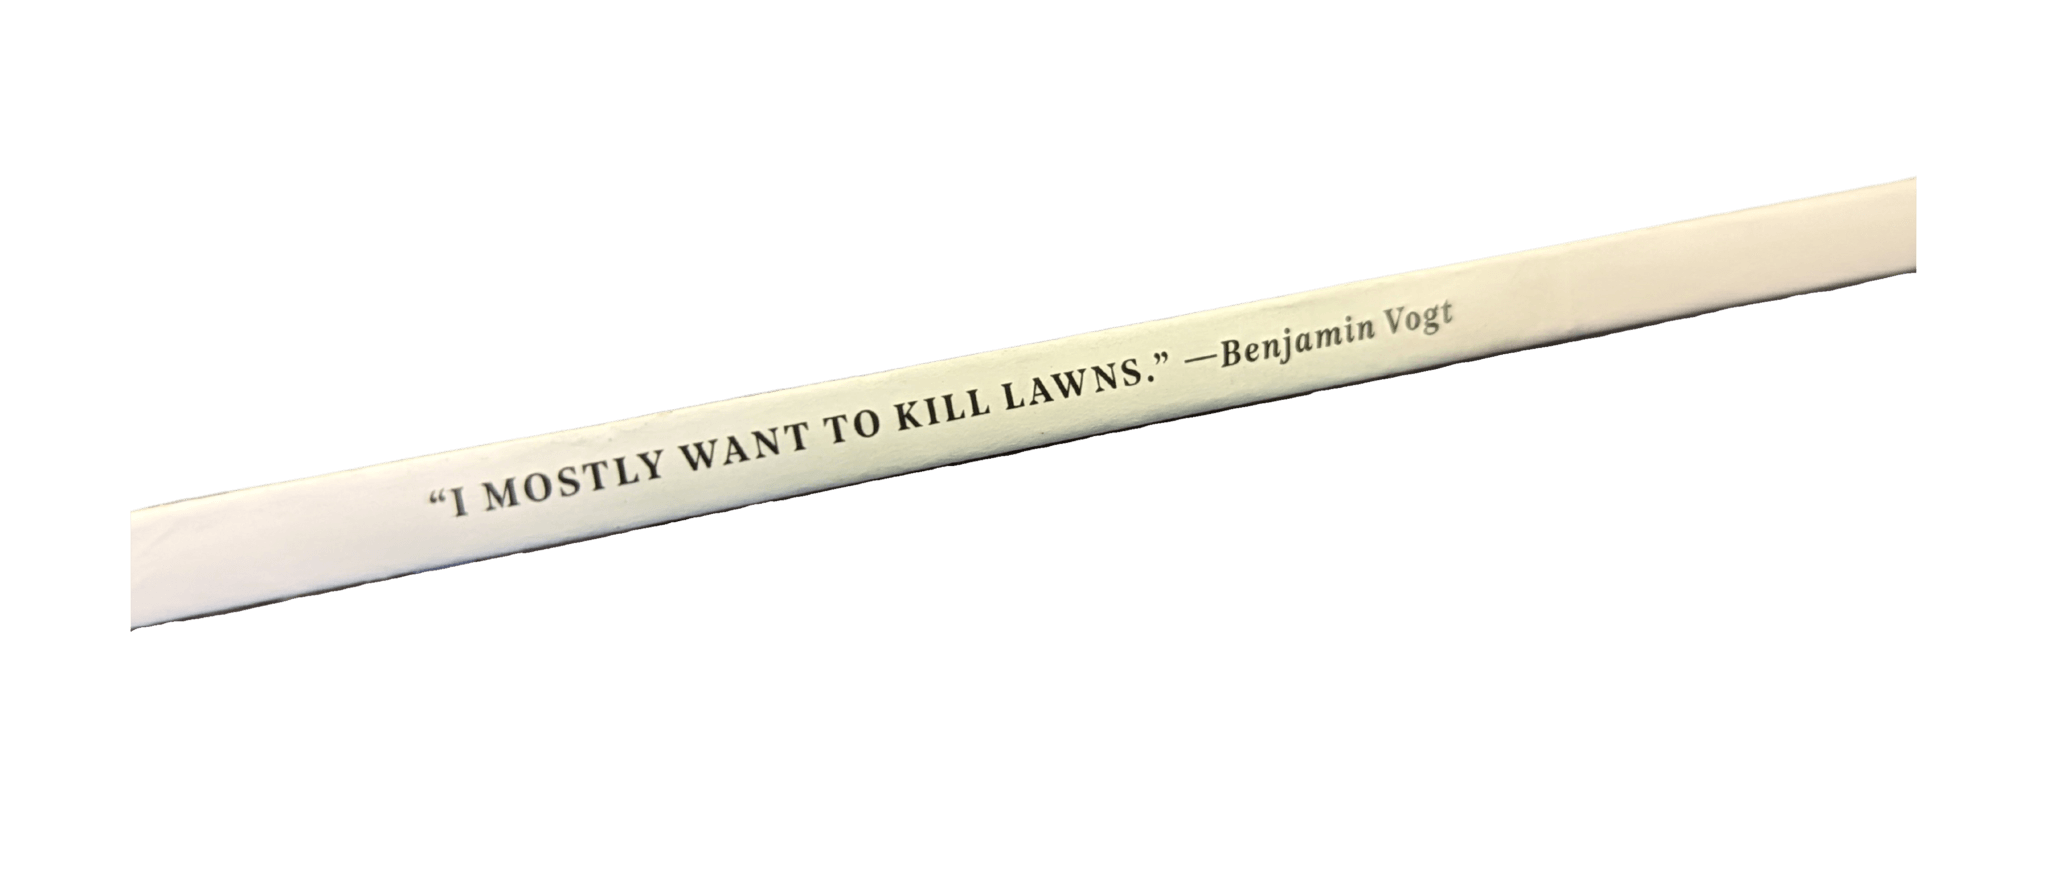 I mostly want to kill lawn, benjamin vogt, on the spine of an issue of Dwell Magazine.